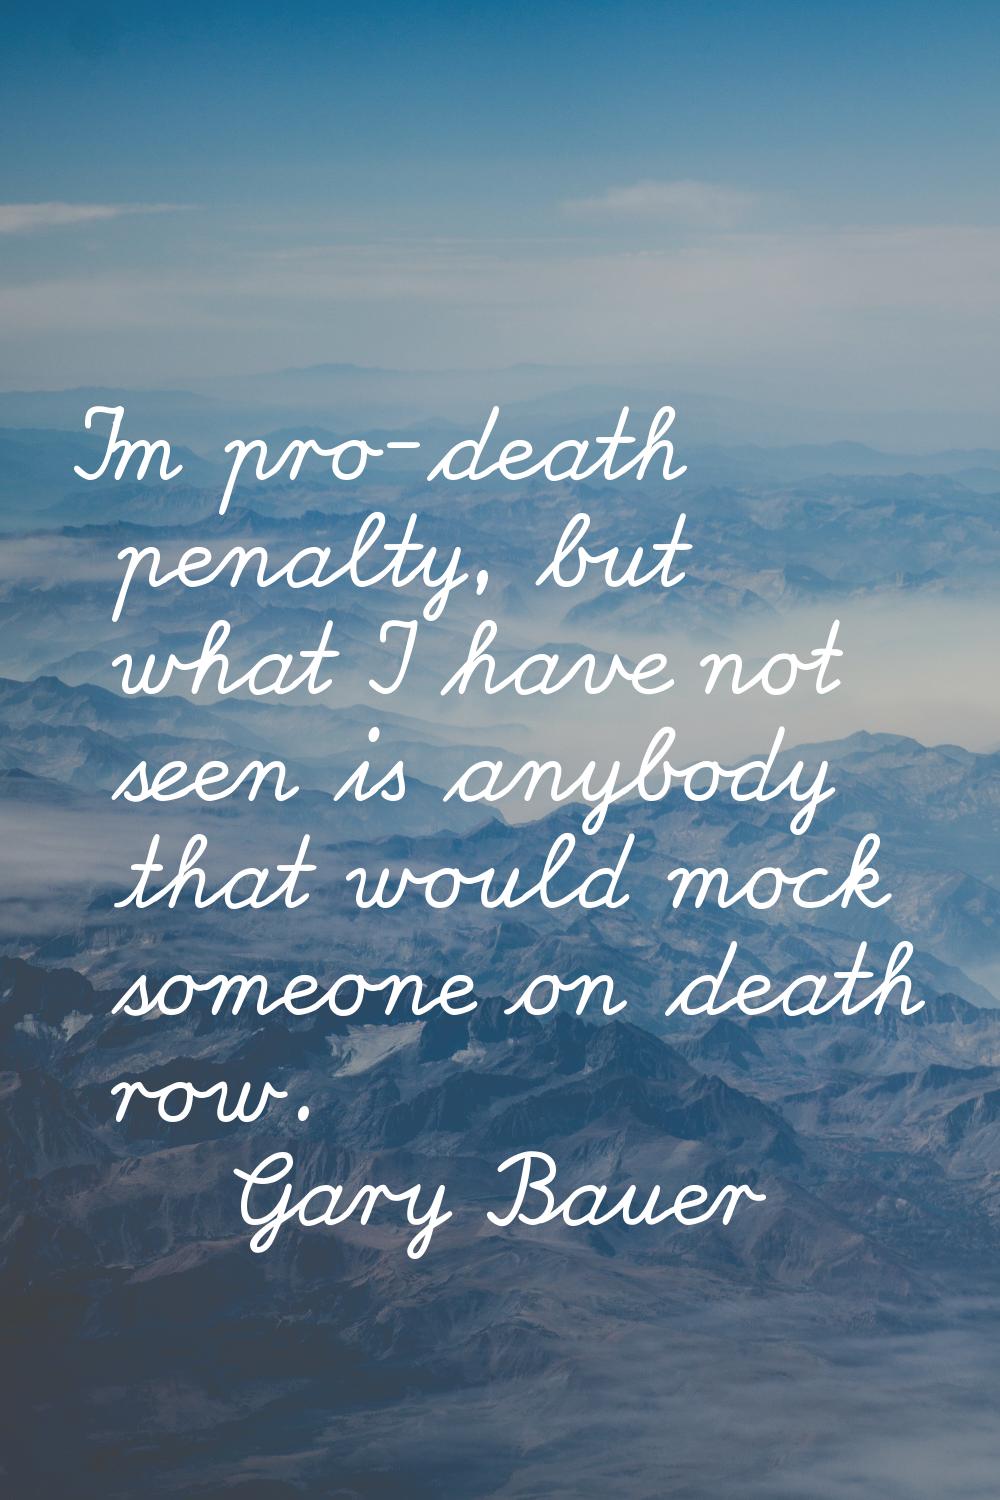 I'm pro-death penalty, but what I have not seen is anybody that would mock someone on death row.